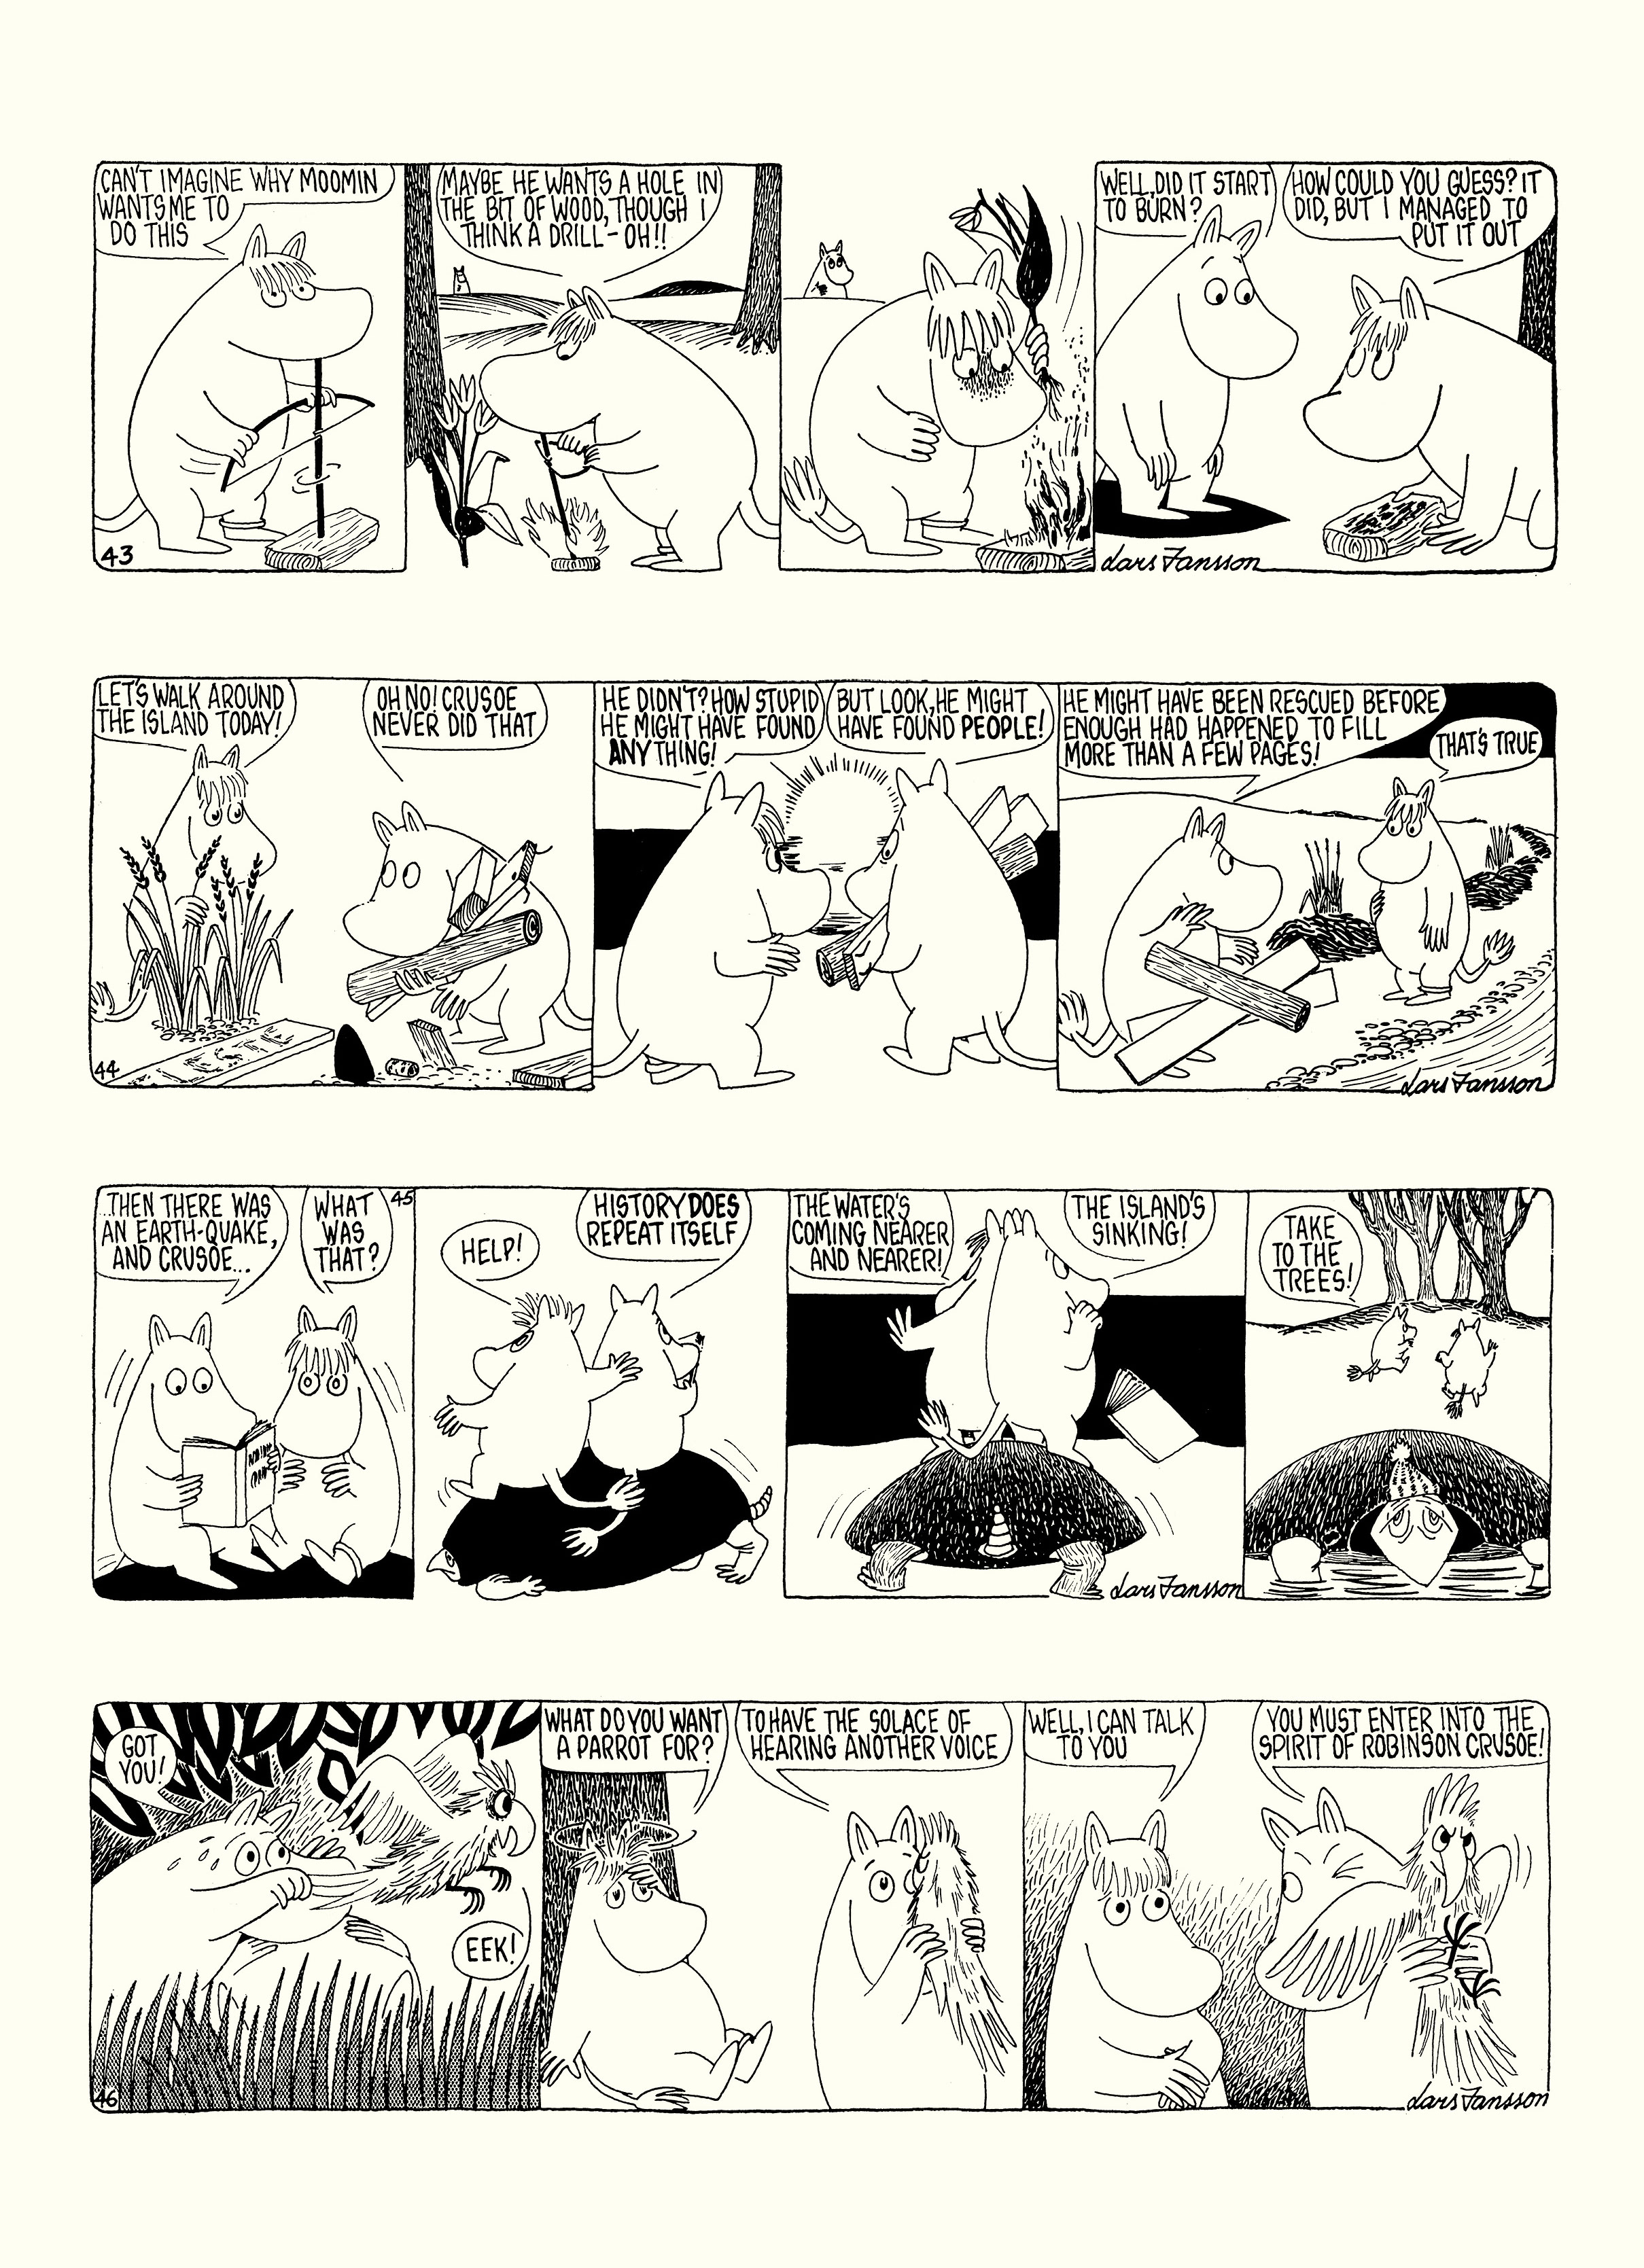 Read online Moomin: The Complete Lars Jansson Comic Strip comic -  Issue # TPB 8 - 16